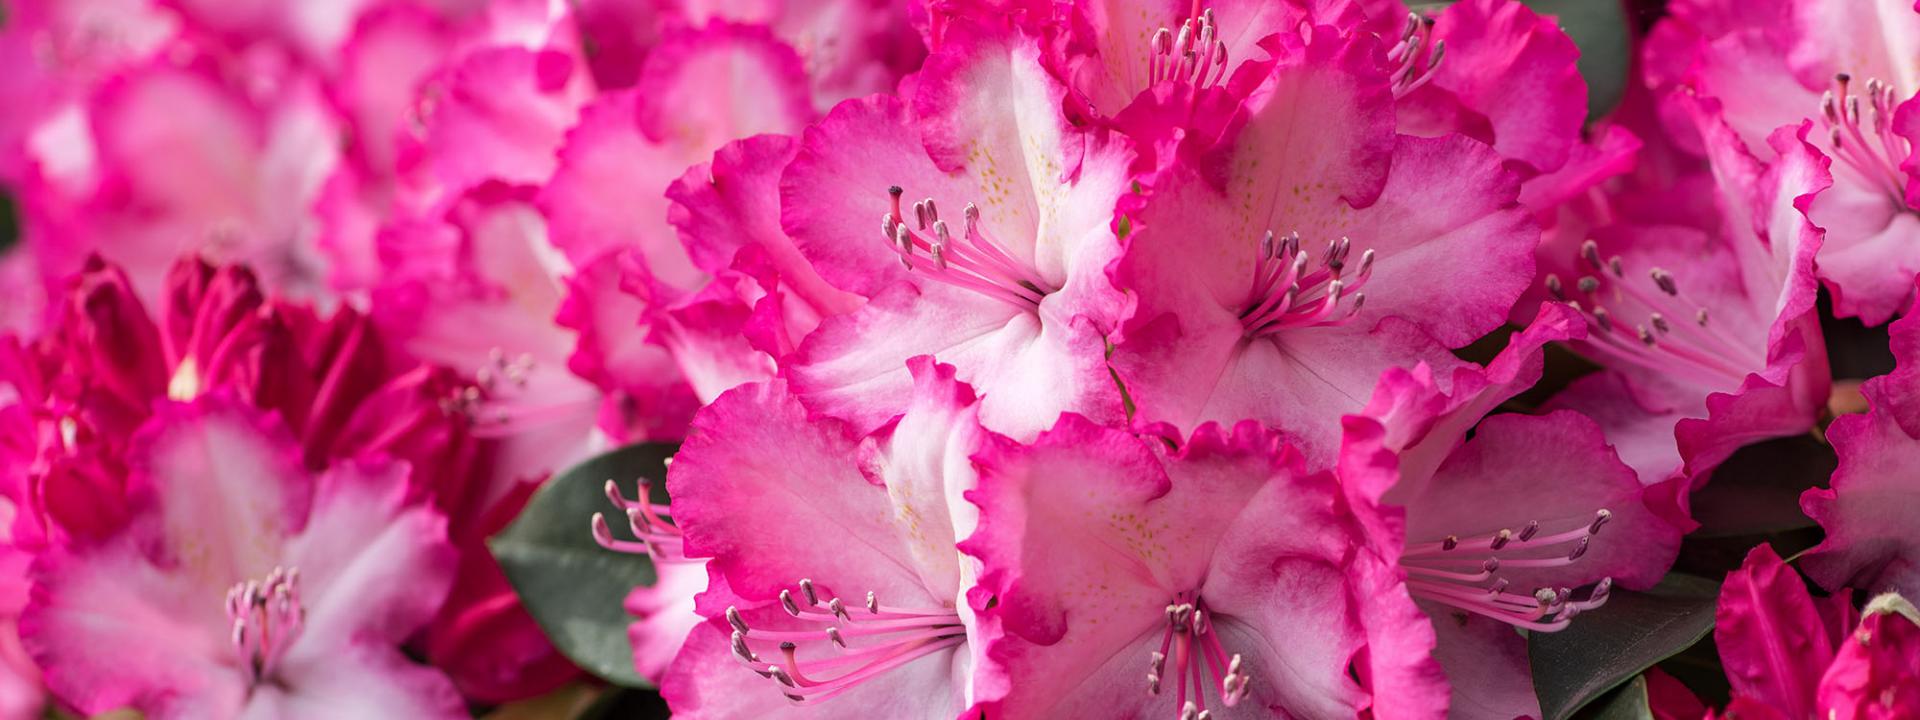 What is the flowering time and & flowering period of a rhododendron?